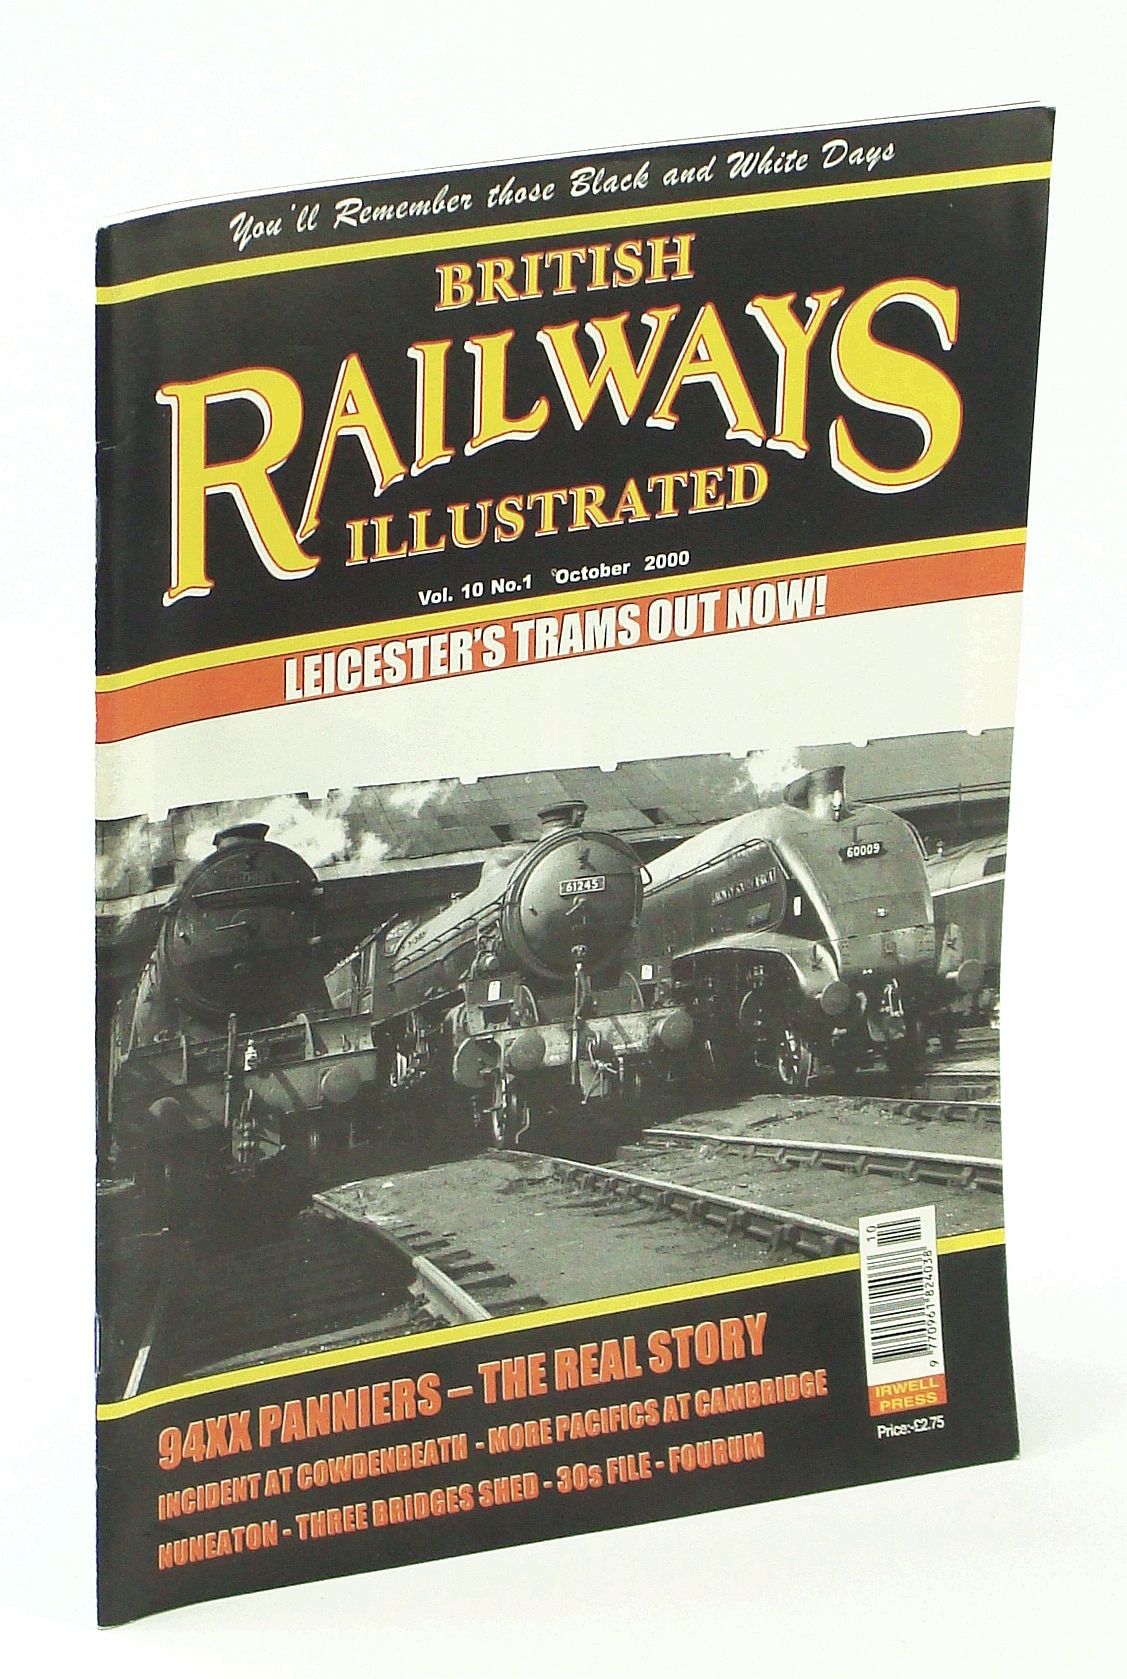 Image for British Railways Illustrated [Magazine], October [Oct.] 2000, Vol. 10 No.1 - 94XX Panniers - The Real Story